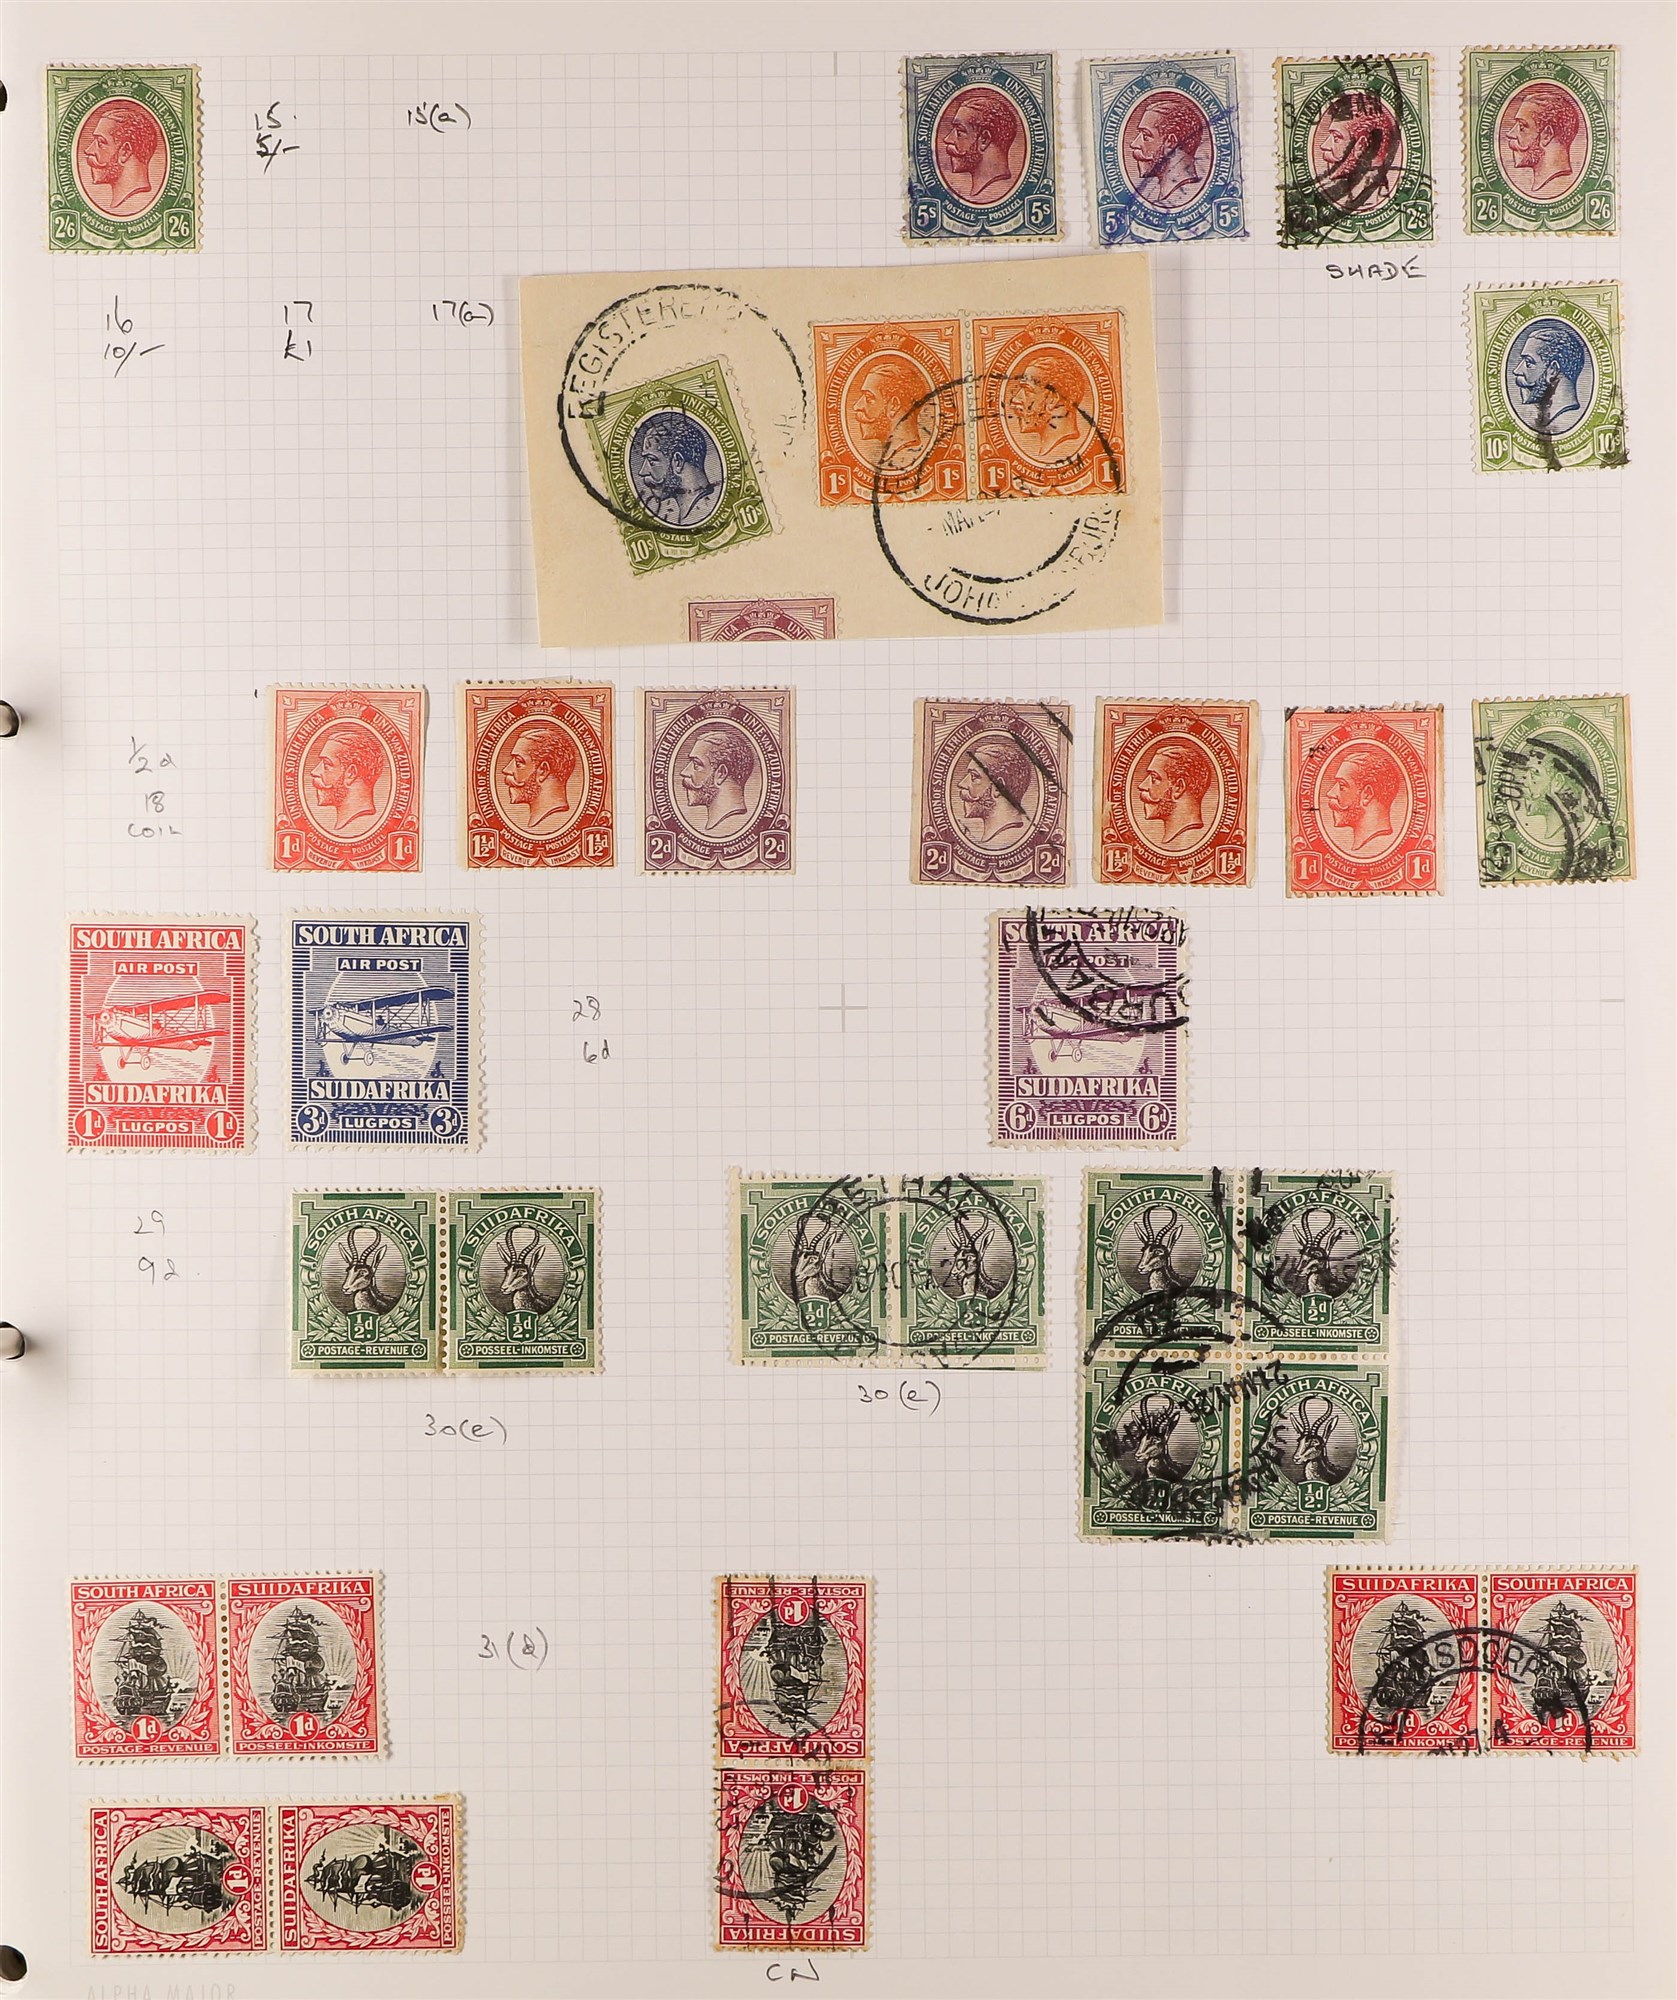 SOUTH AFRICA 1910 - 2010 COLLECTION of mint & used stamps in album, many high values, sets (2200+ - Image 2 of 17